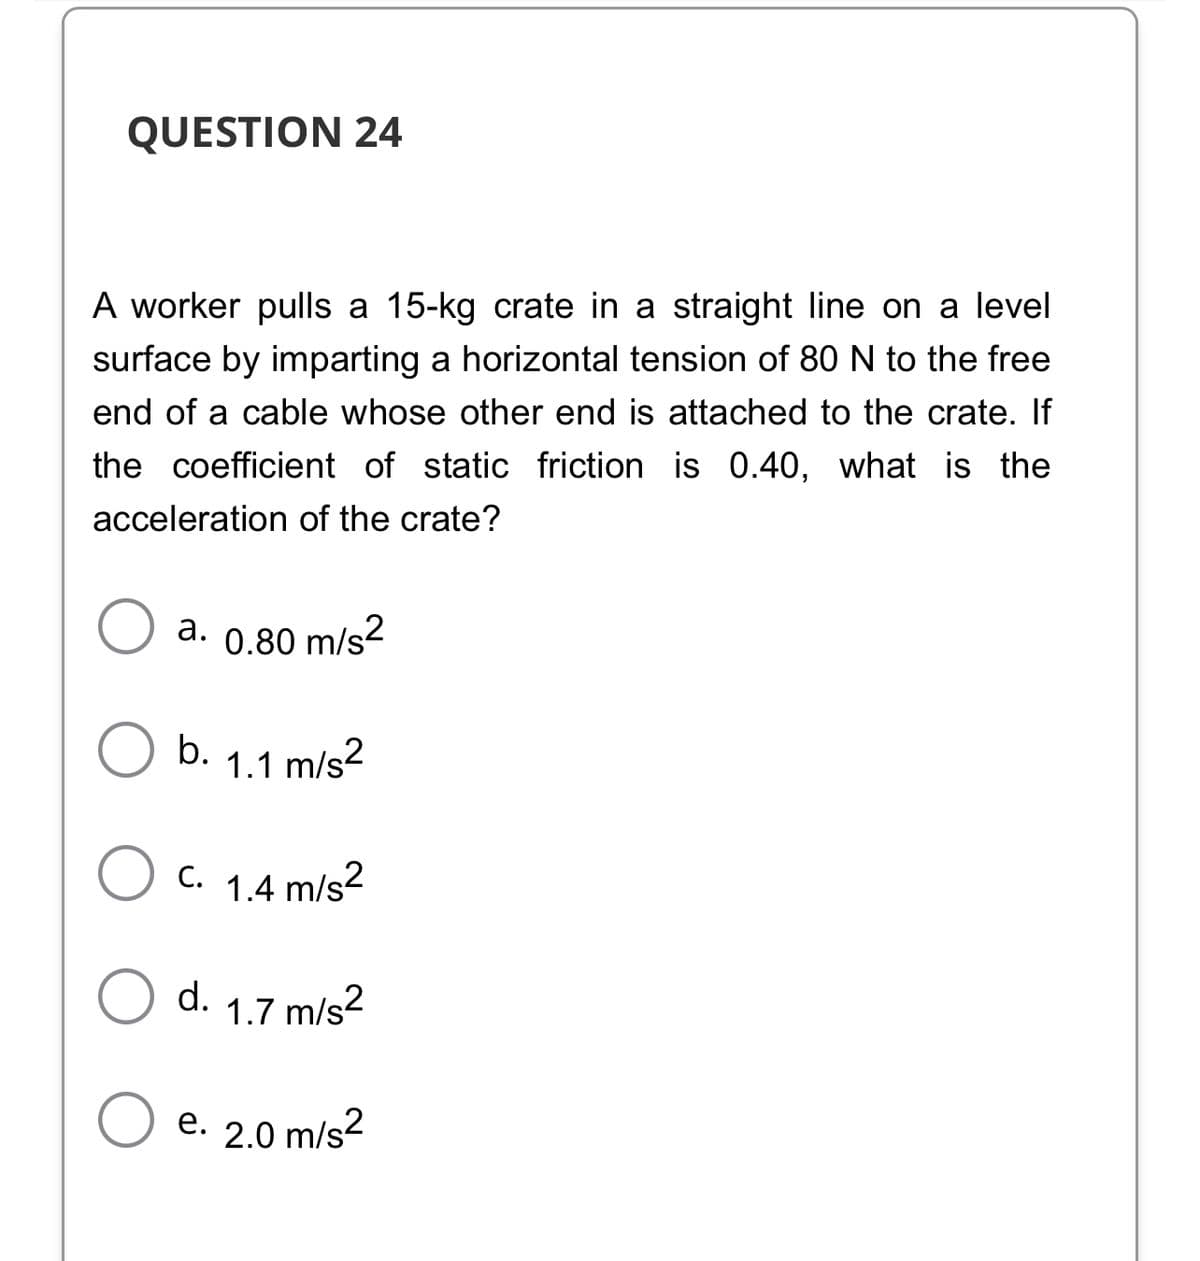 QUESTION 24
A worker pulls a 15-kg crate in a straight line on a level
surface by imparting a horizontal tension of 80 N to the free
end of a cable whose other end is attached to the crate. If
the coefficient of static friction is 0.40, what is the
acceleration of the crate?
a. 0.80 m/s2
b. 1.1 m/s?
C. 1.4 m/s?
d.
1.7 m/s2
e. 2.0 m/s?
